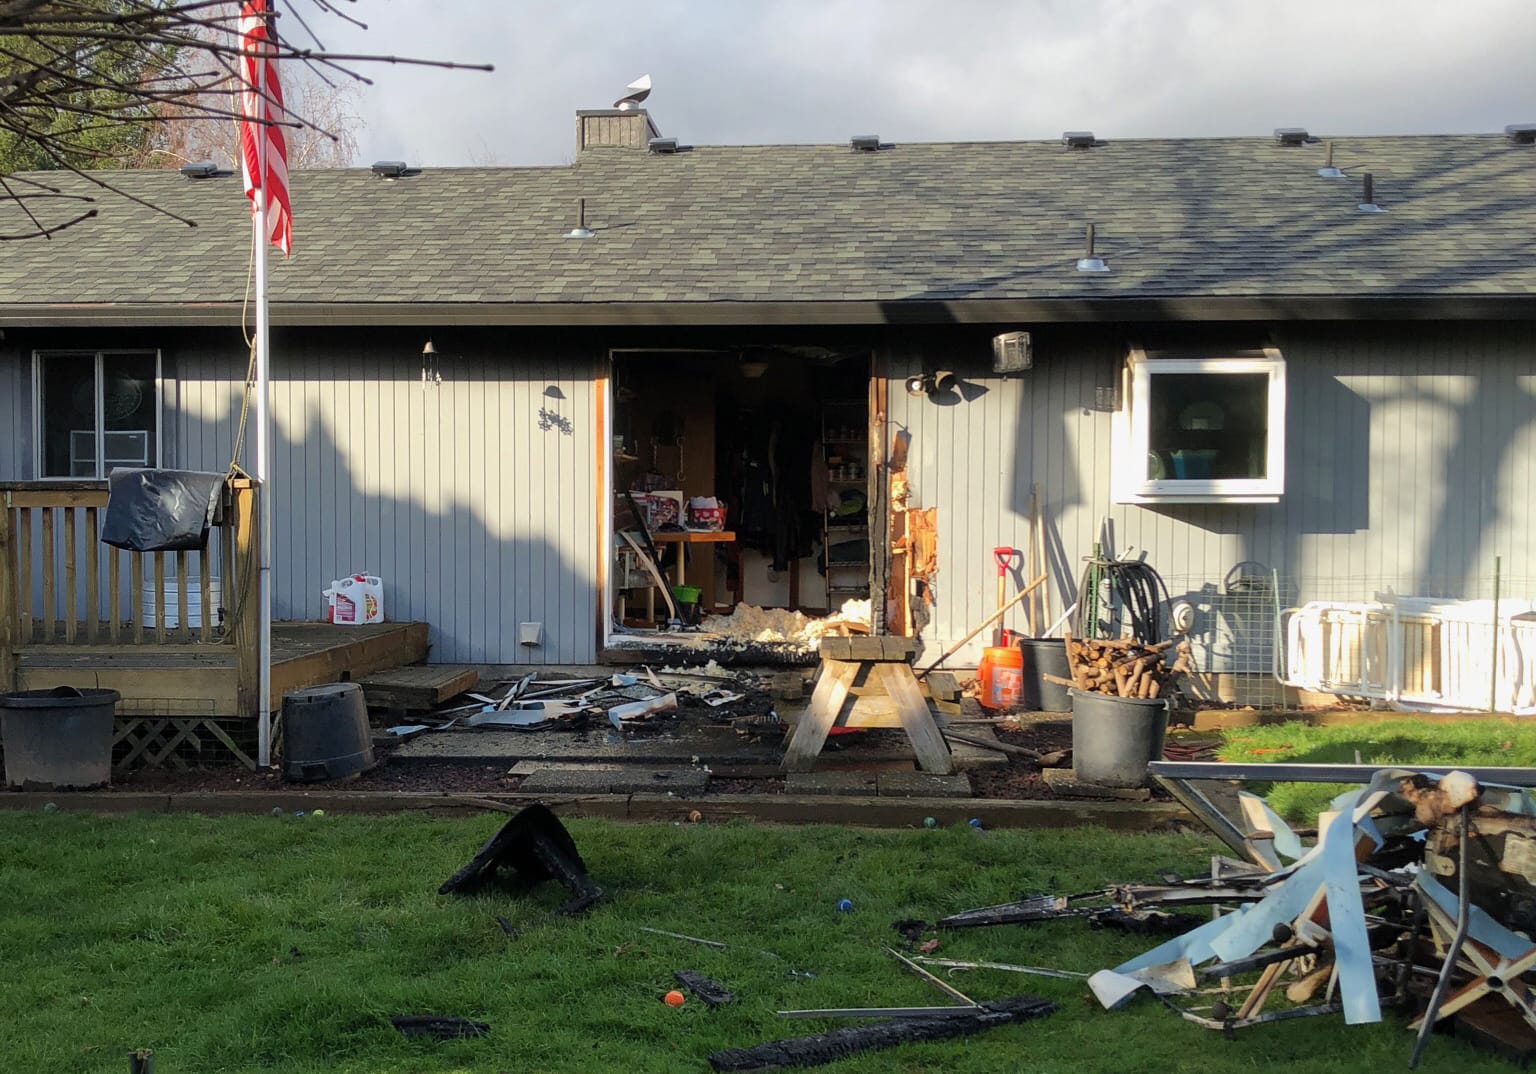 Camas-Washougal firefighters rescued a man and his two dogs from this home on Feb. 14 after a small kitchen fire spread, causing smoke to fill the residence.